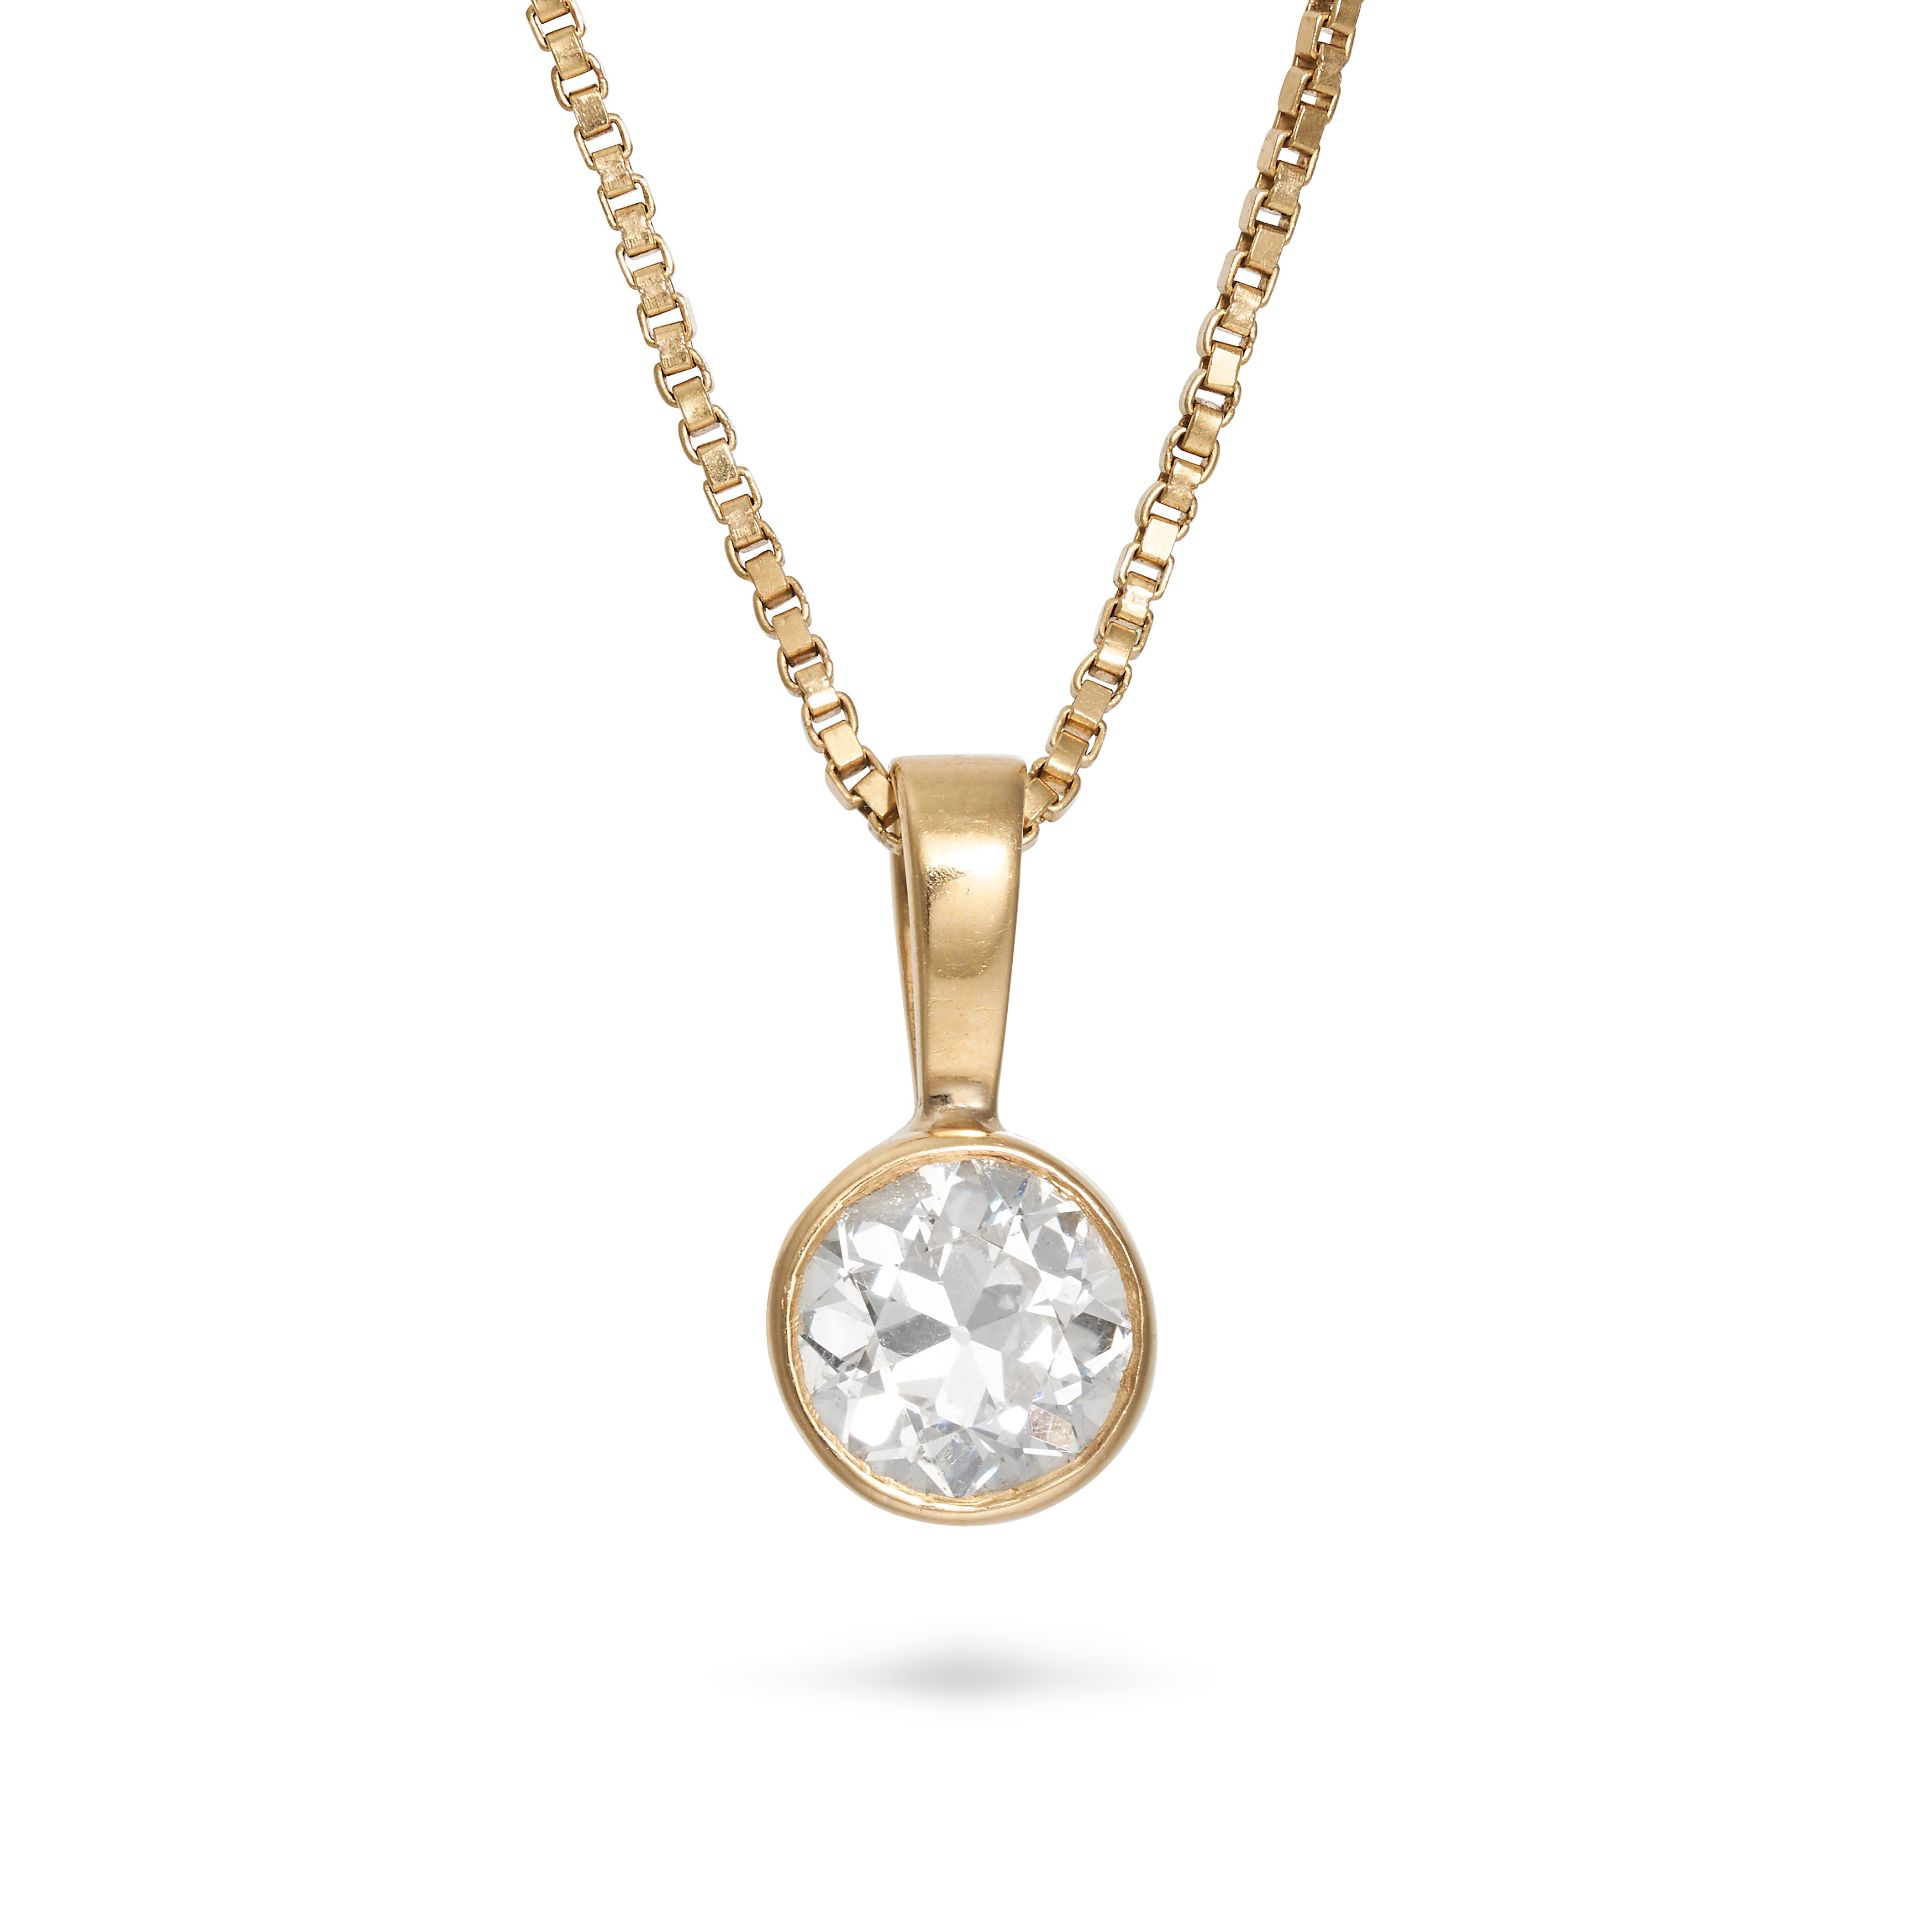 A DIAMOND PENDANT NECKLACE in 18ct yellow gold, the pendant set with an old European cut diamond ...